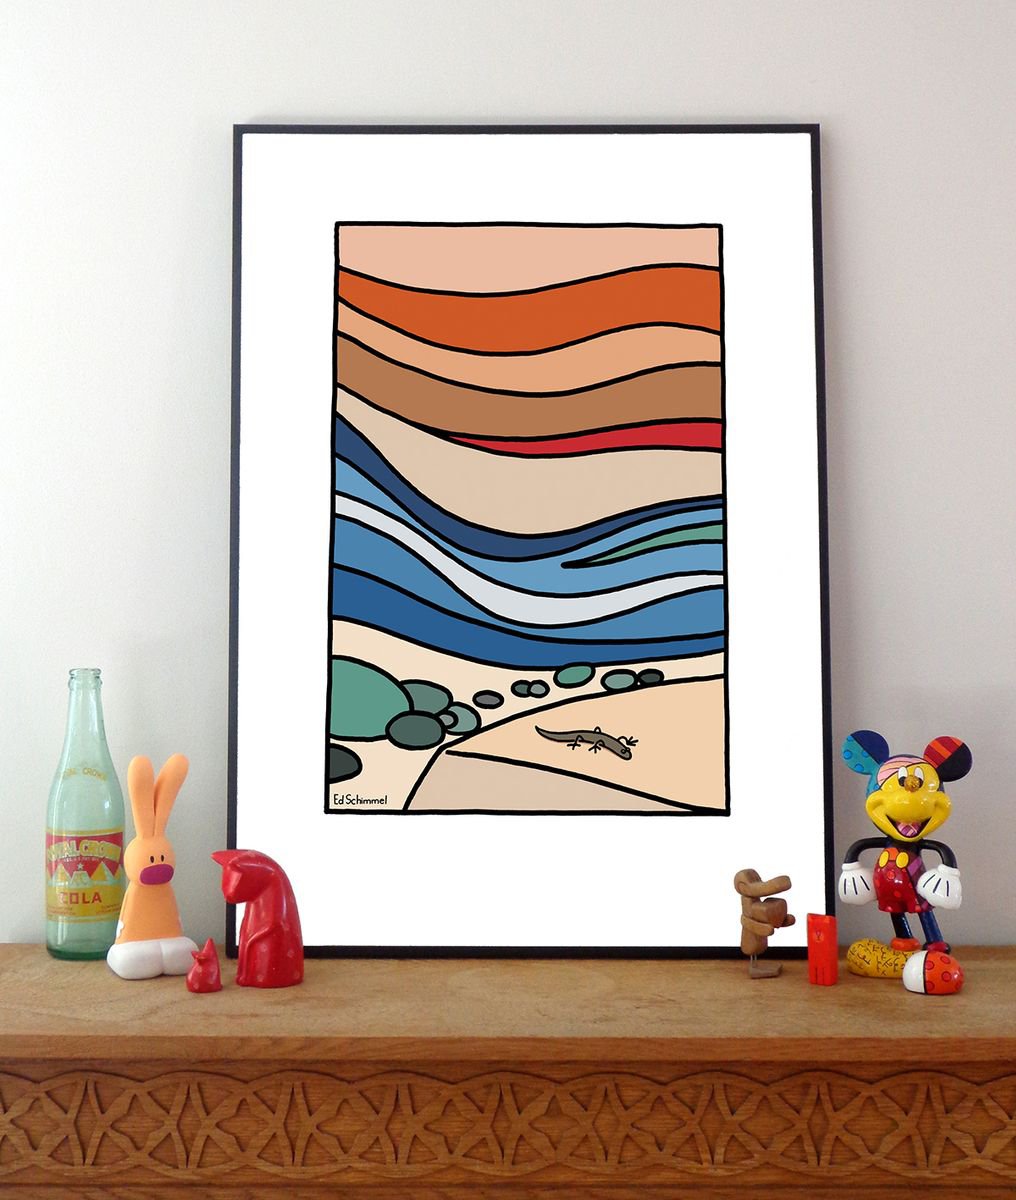 Shorncliffe - Layer upon layer - Modern Graphic Art Print by Ed Schimmel